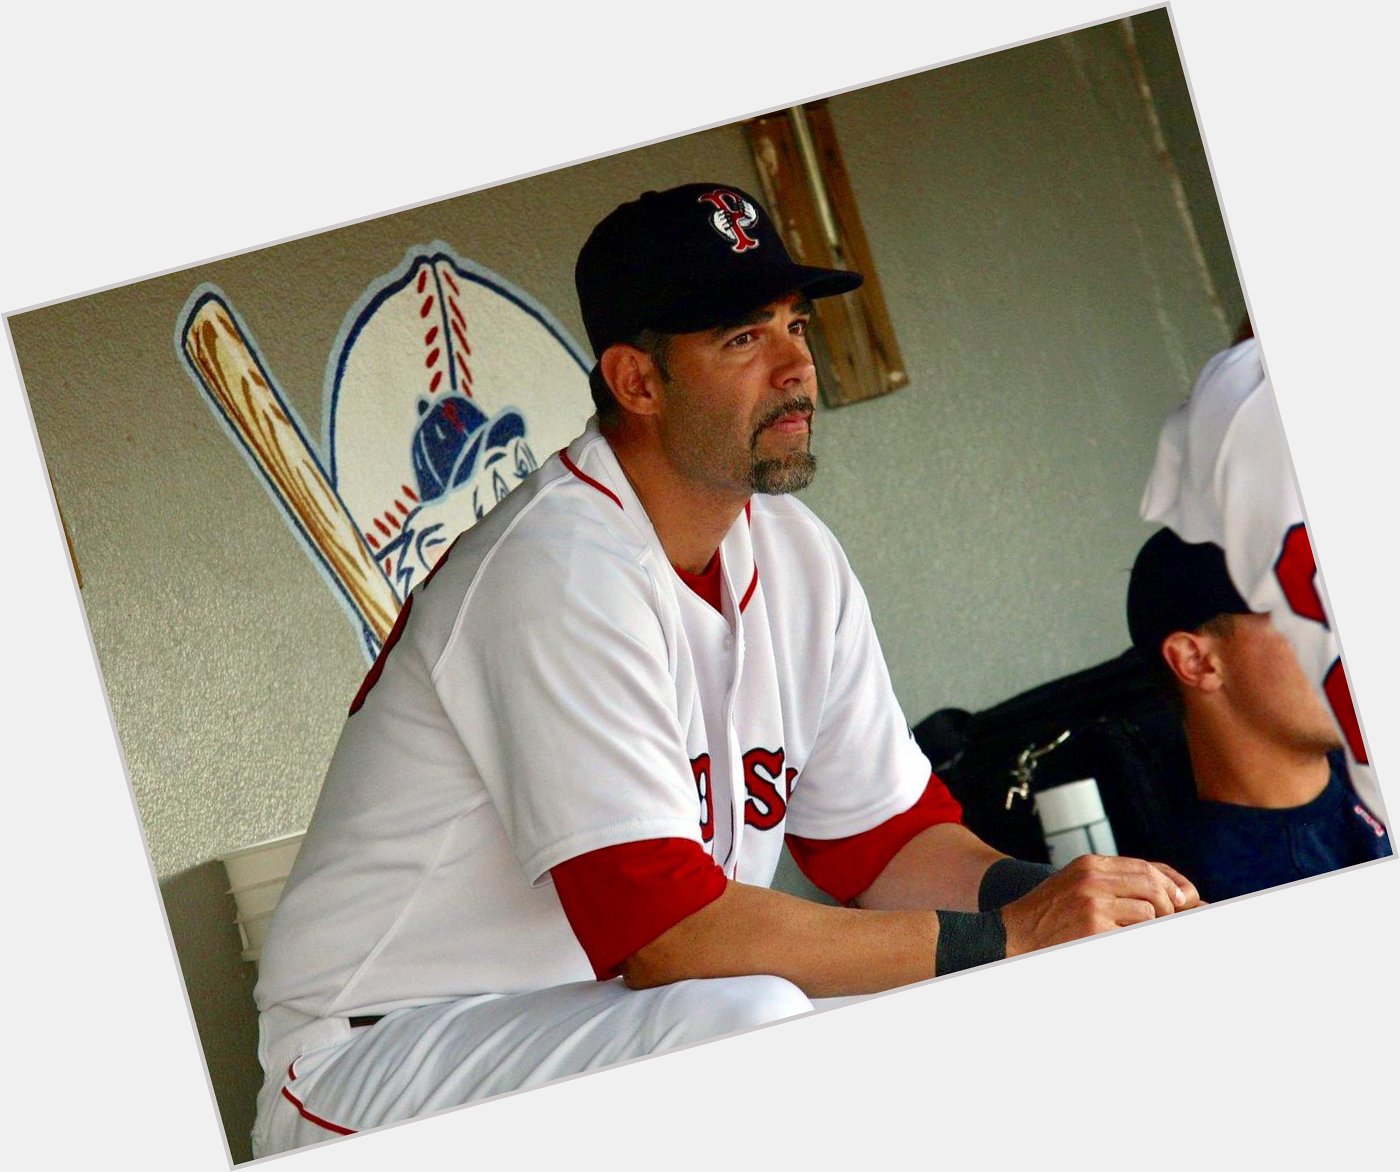 A special Happy Birthday to and PawSox fan favorite, Mike Lowell!   